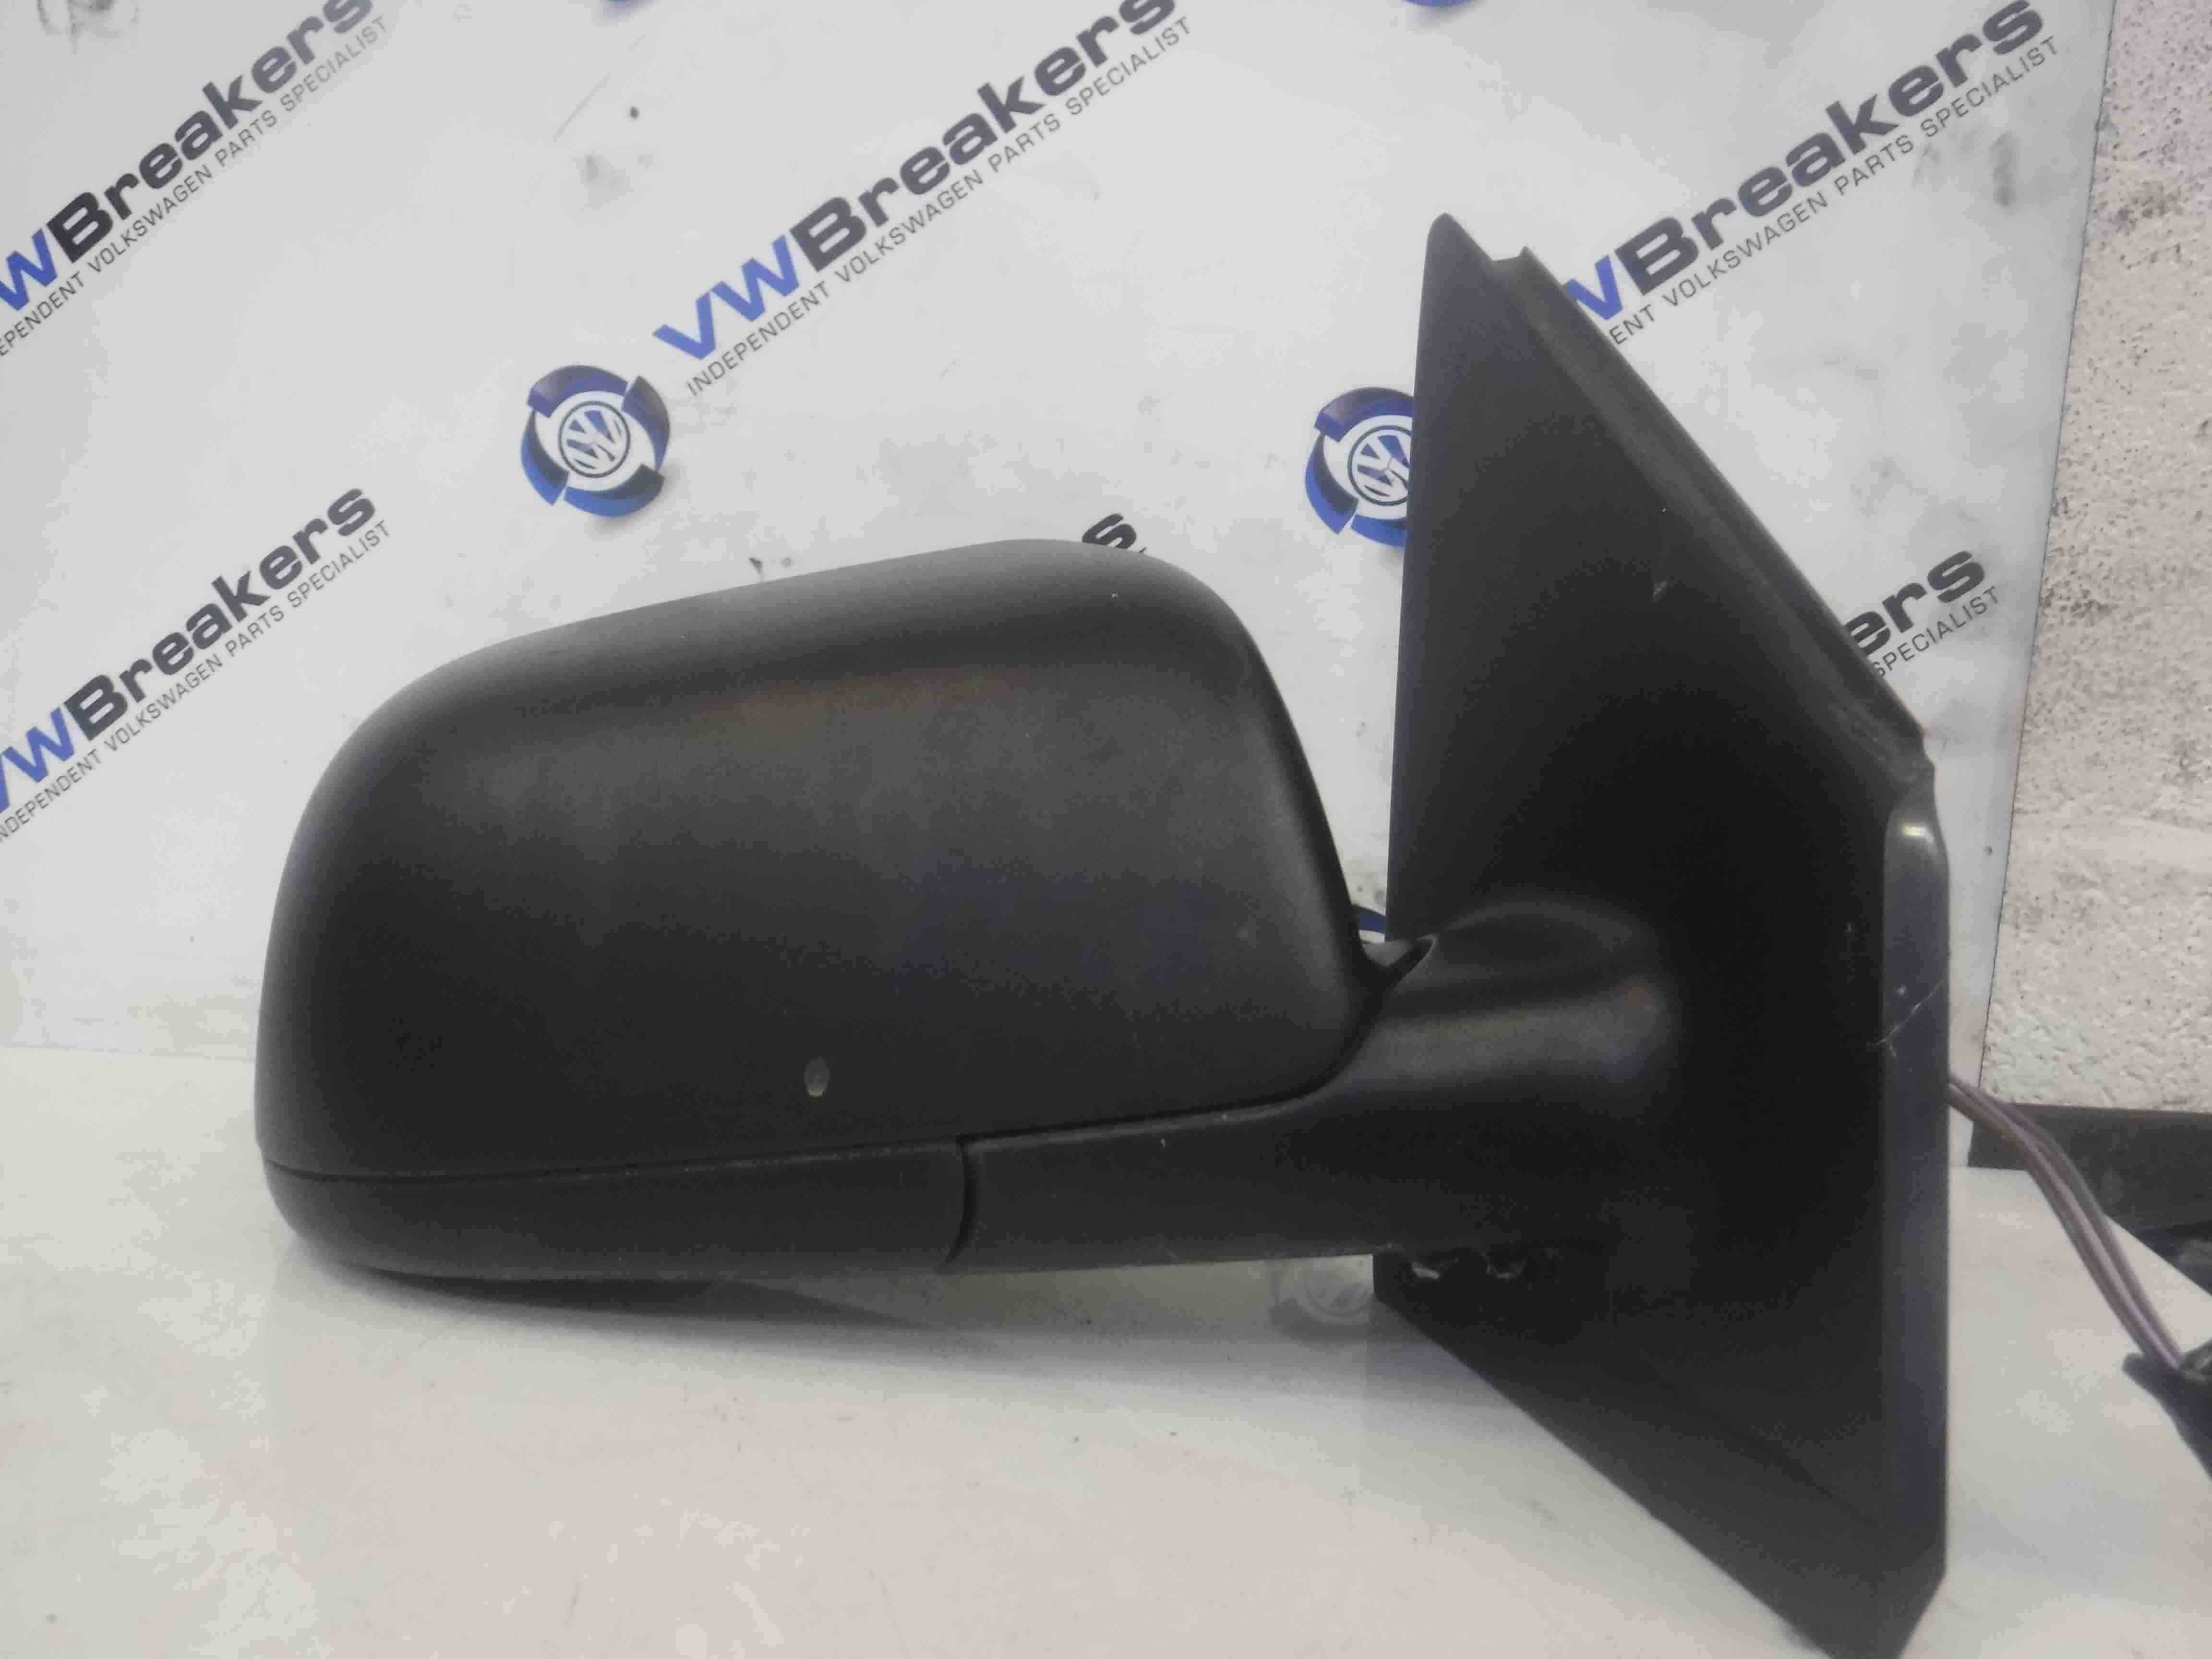 Volkswagen Polo 2003-2006 9N Drivers OS Wing Mirror Plain Black